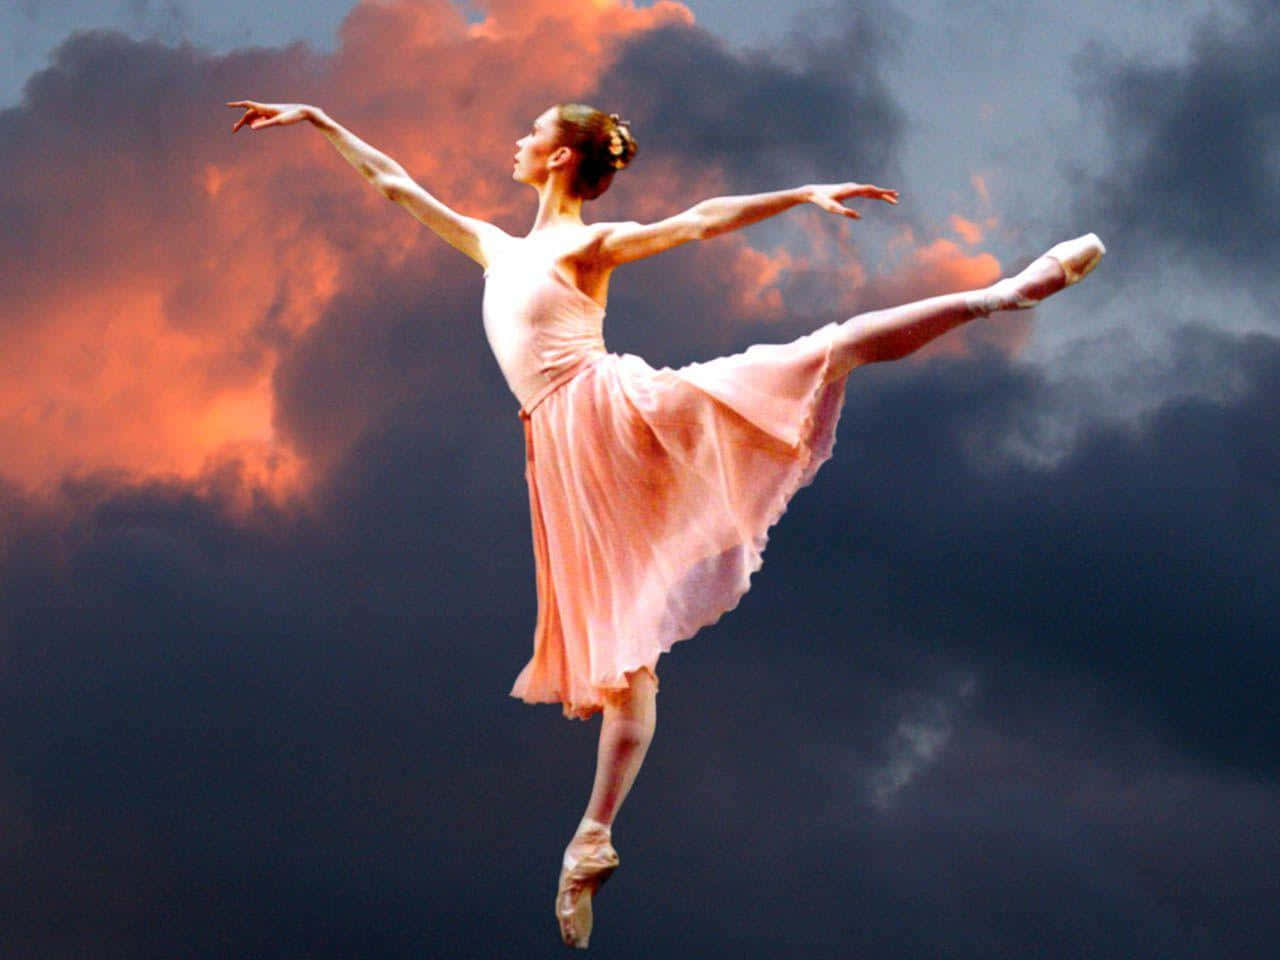 A Ballerina In The Air With A Cloudy Sky